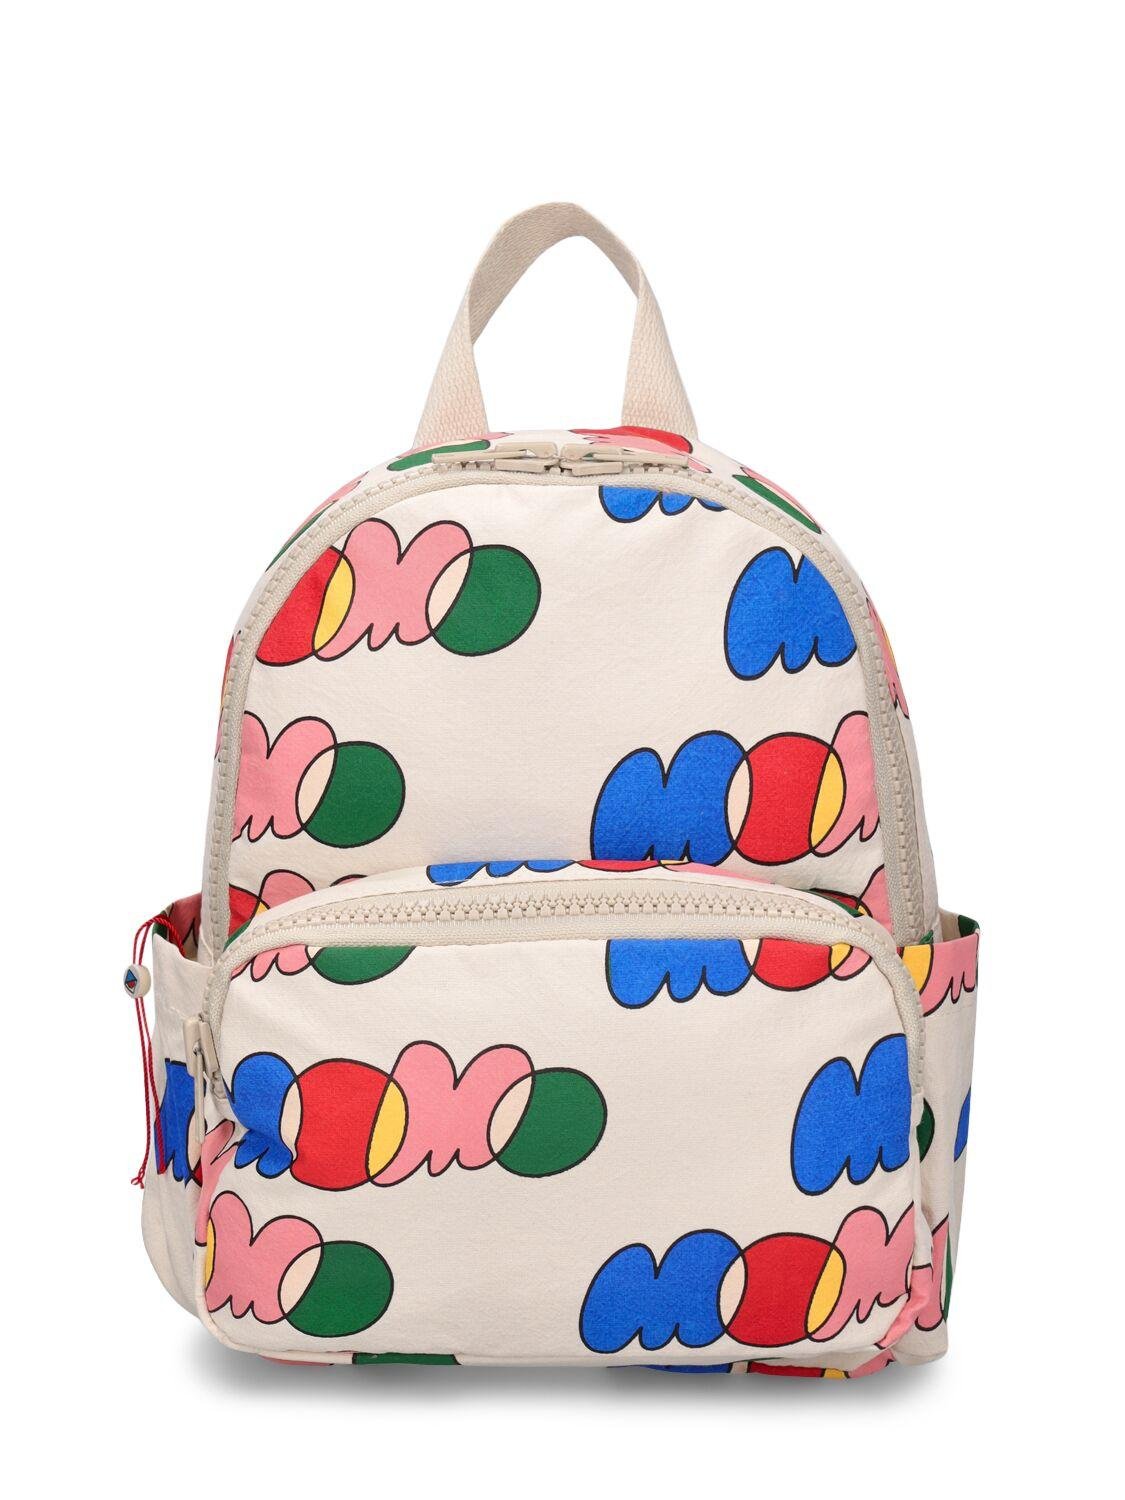 Printed Cotton Backpack by JELLYMALLOW